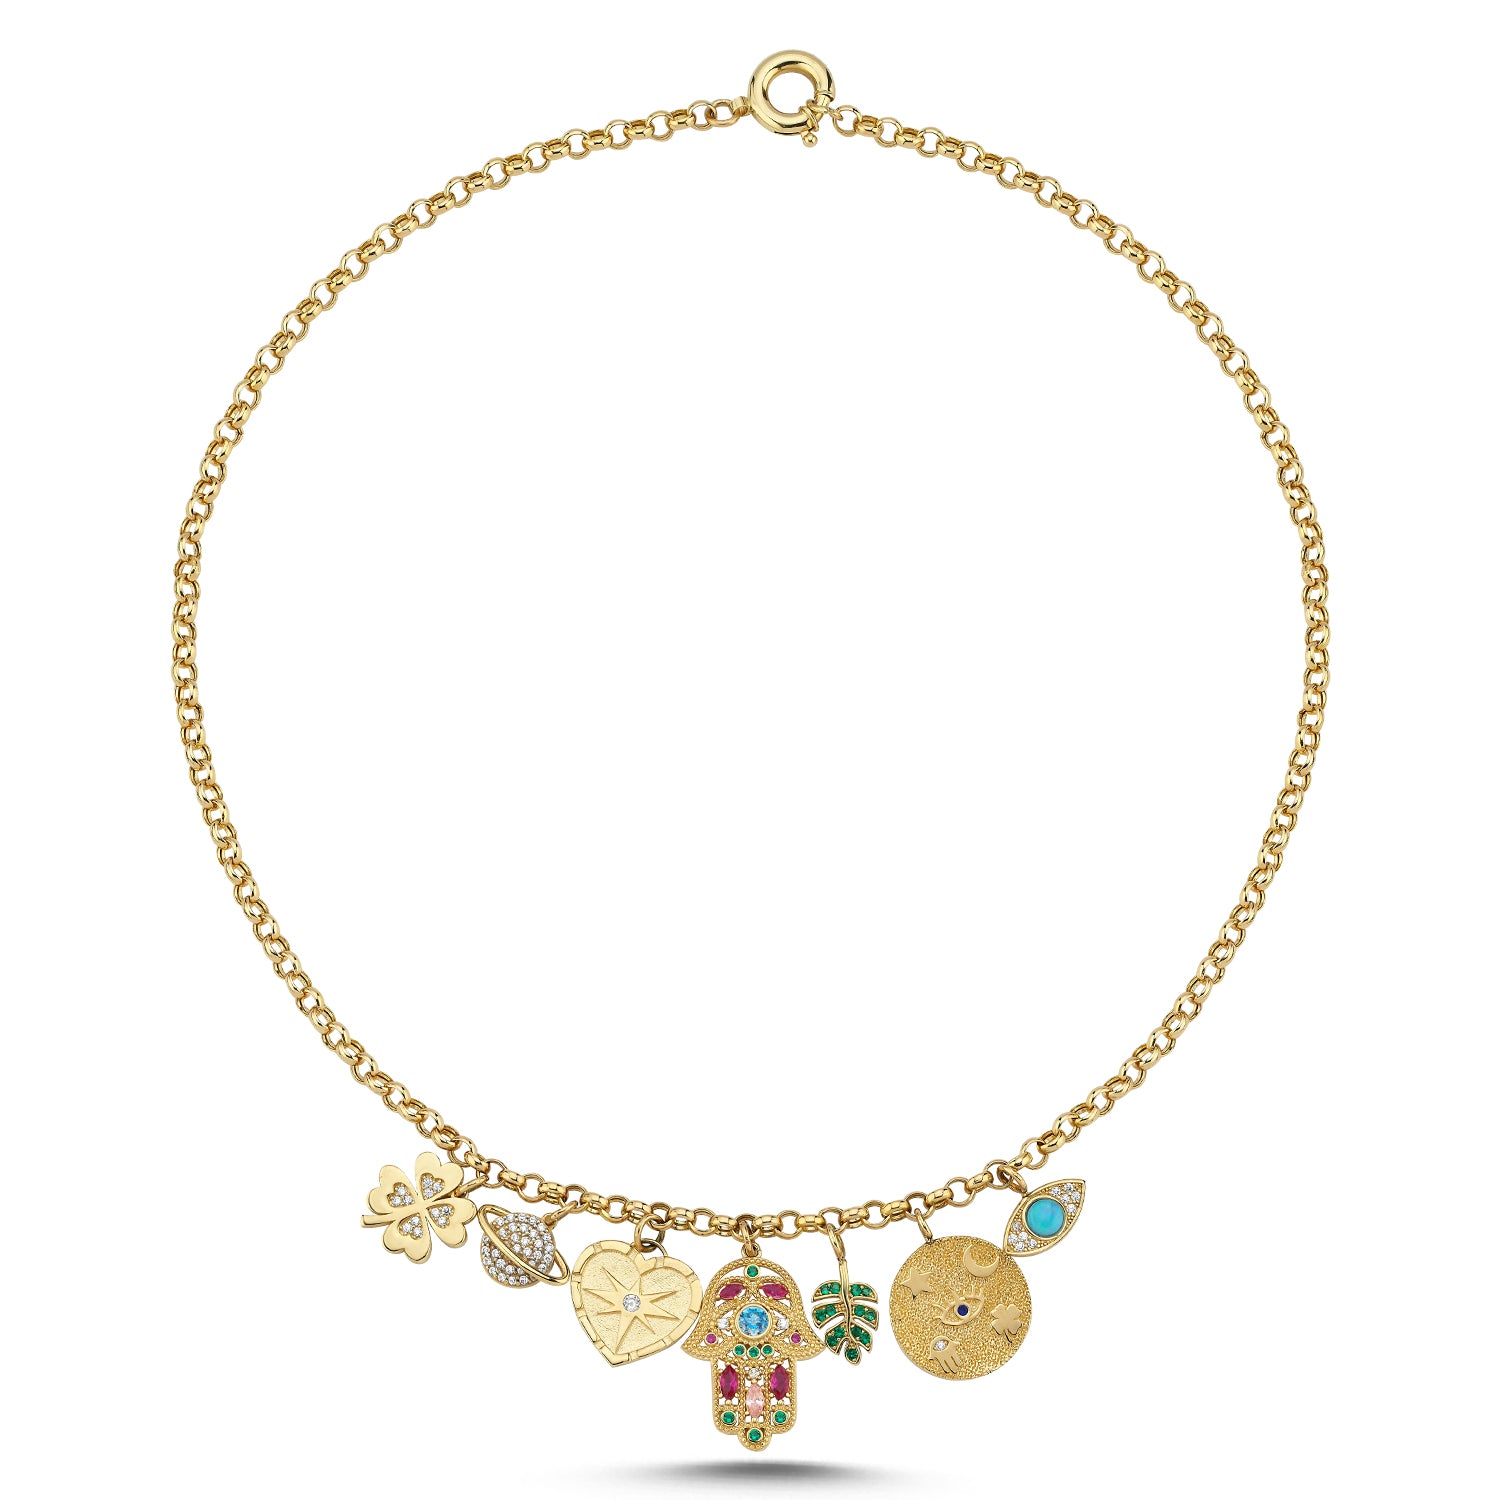 GOLD & DIAMOND LOVE & PROTECTION MULTI-CHARM NECKLACE